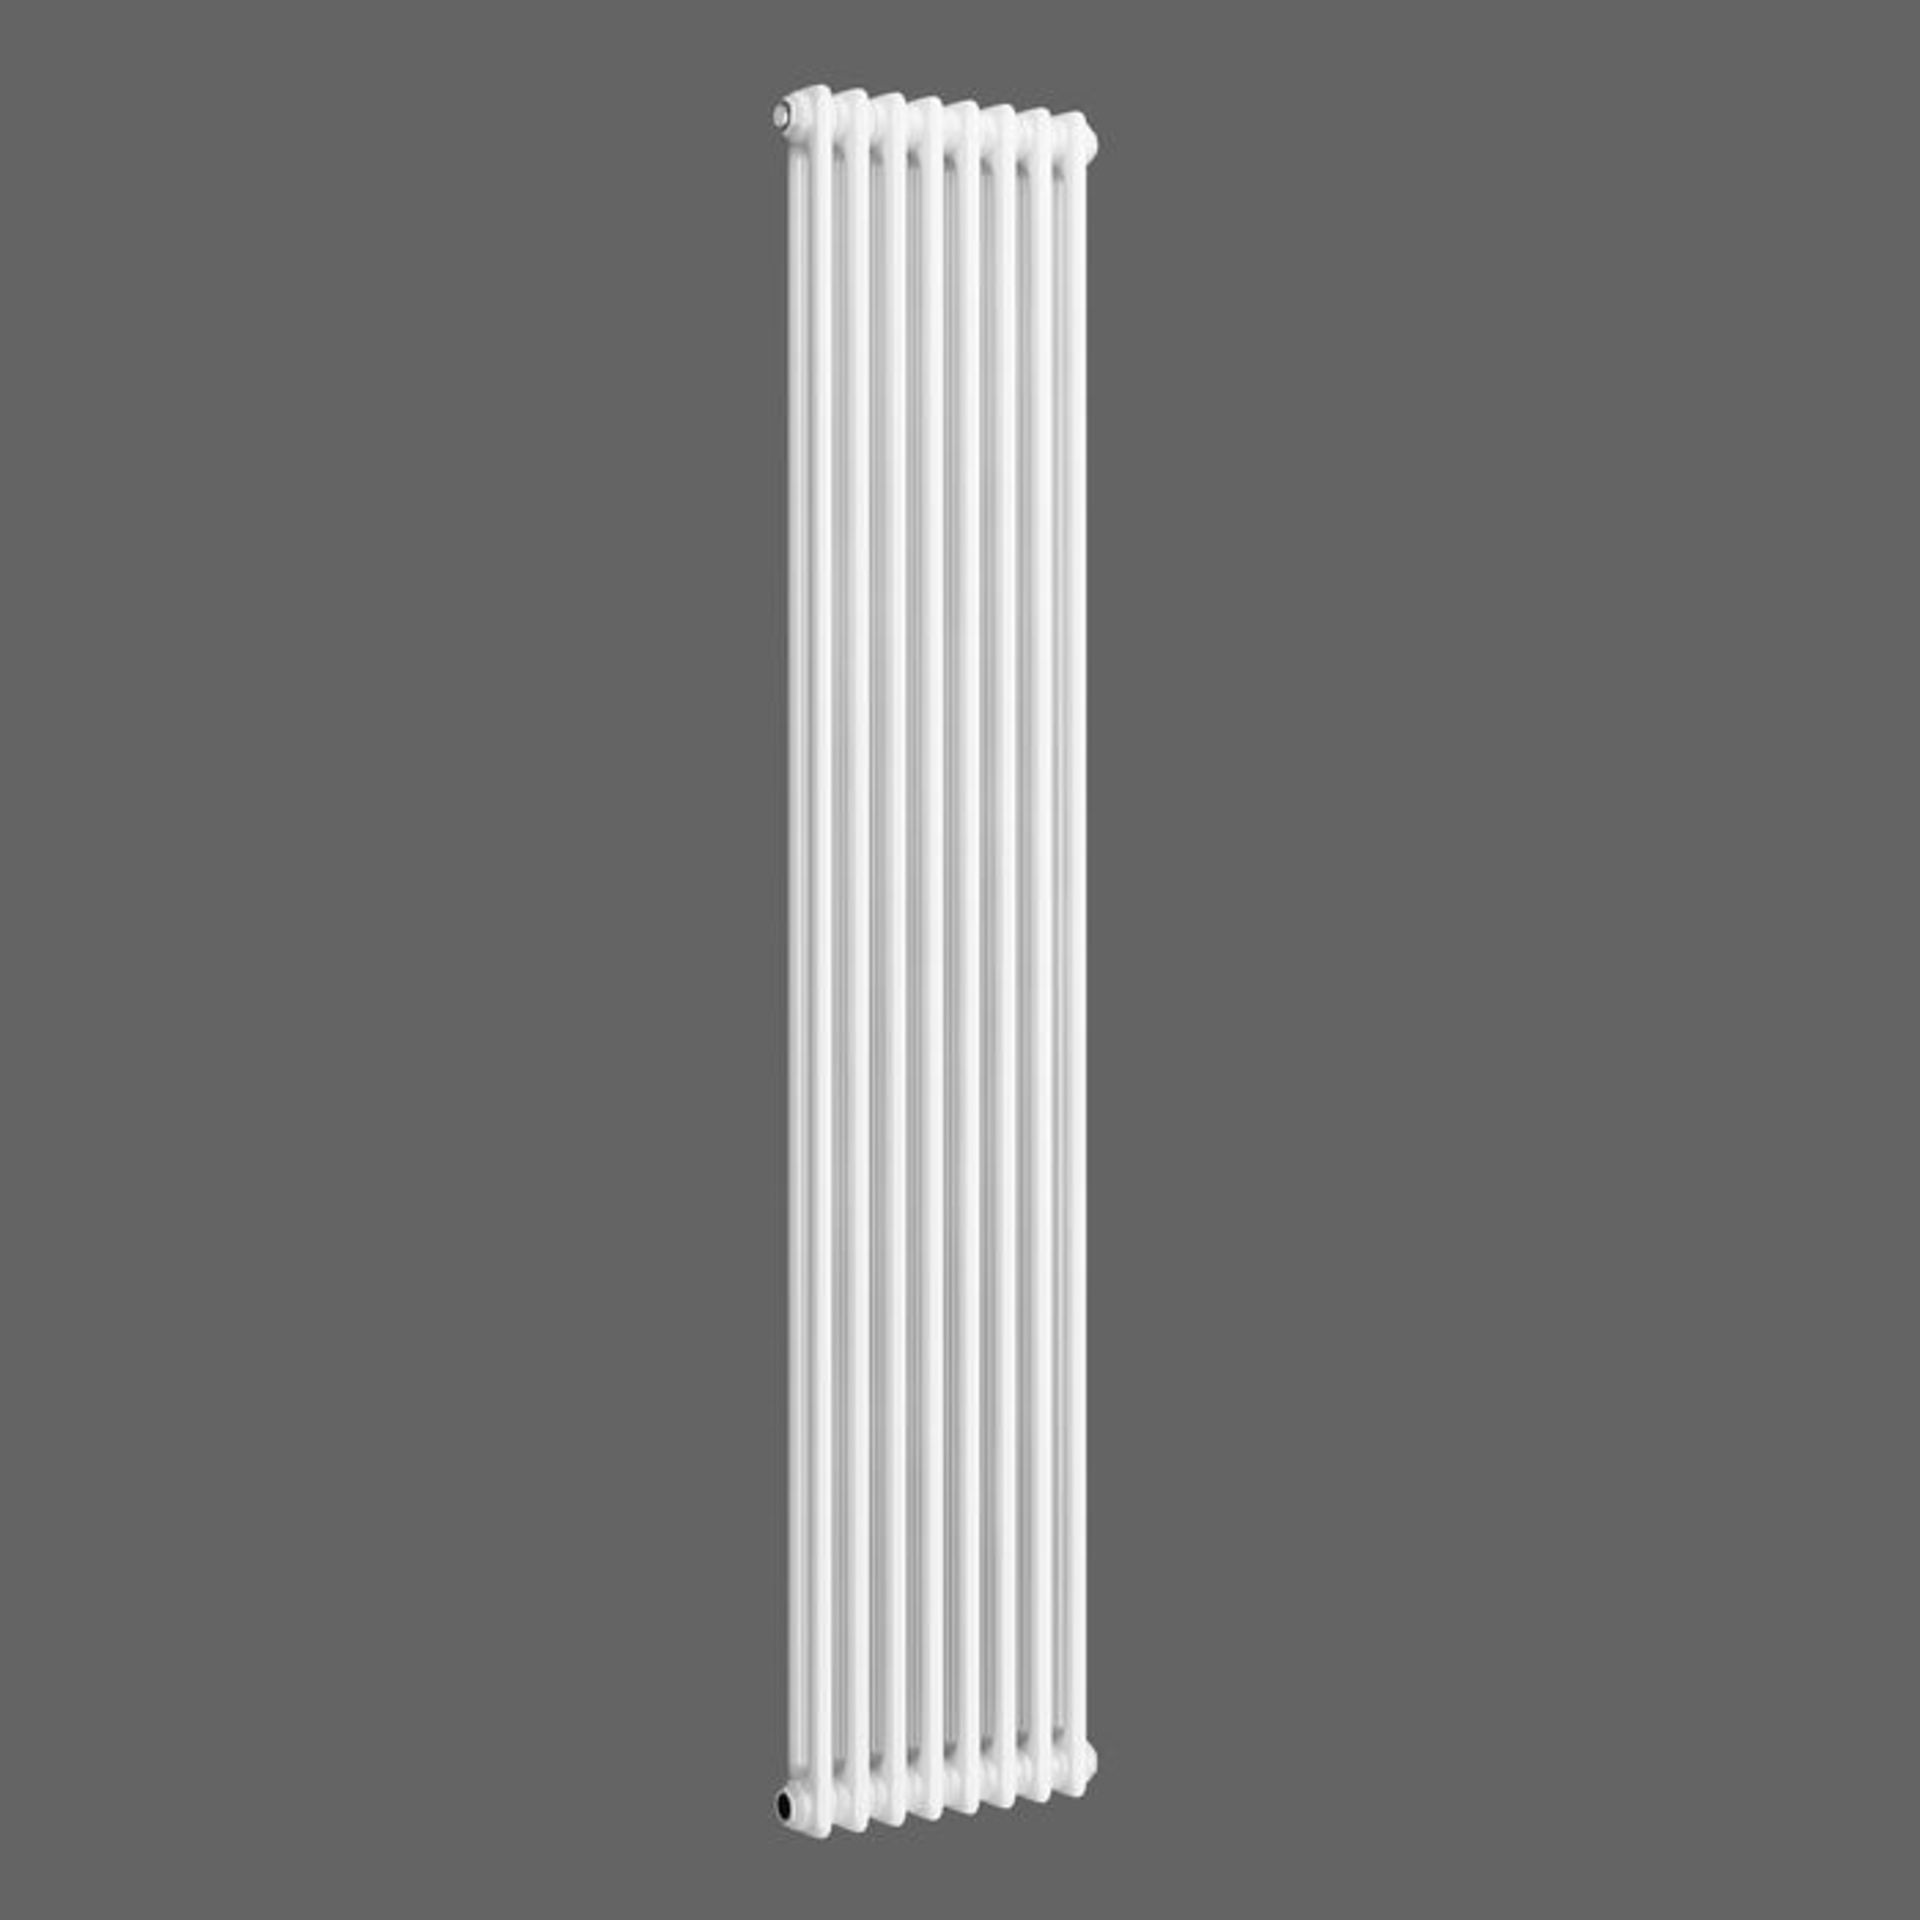 (H178) 1800x380mm White Double Panel Vertical Colosseum Traditional Radiator. RRP £274.99. Low - Image 4 of 4